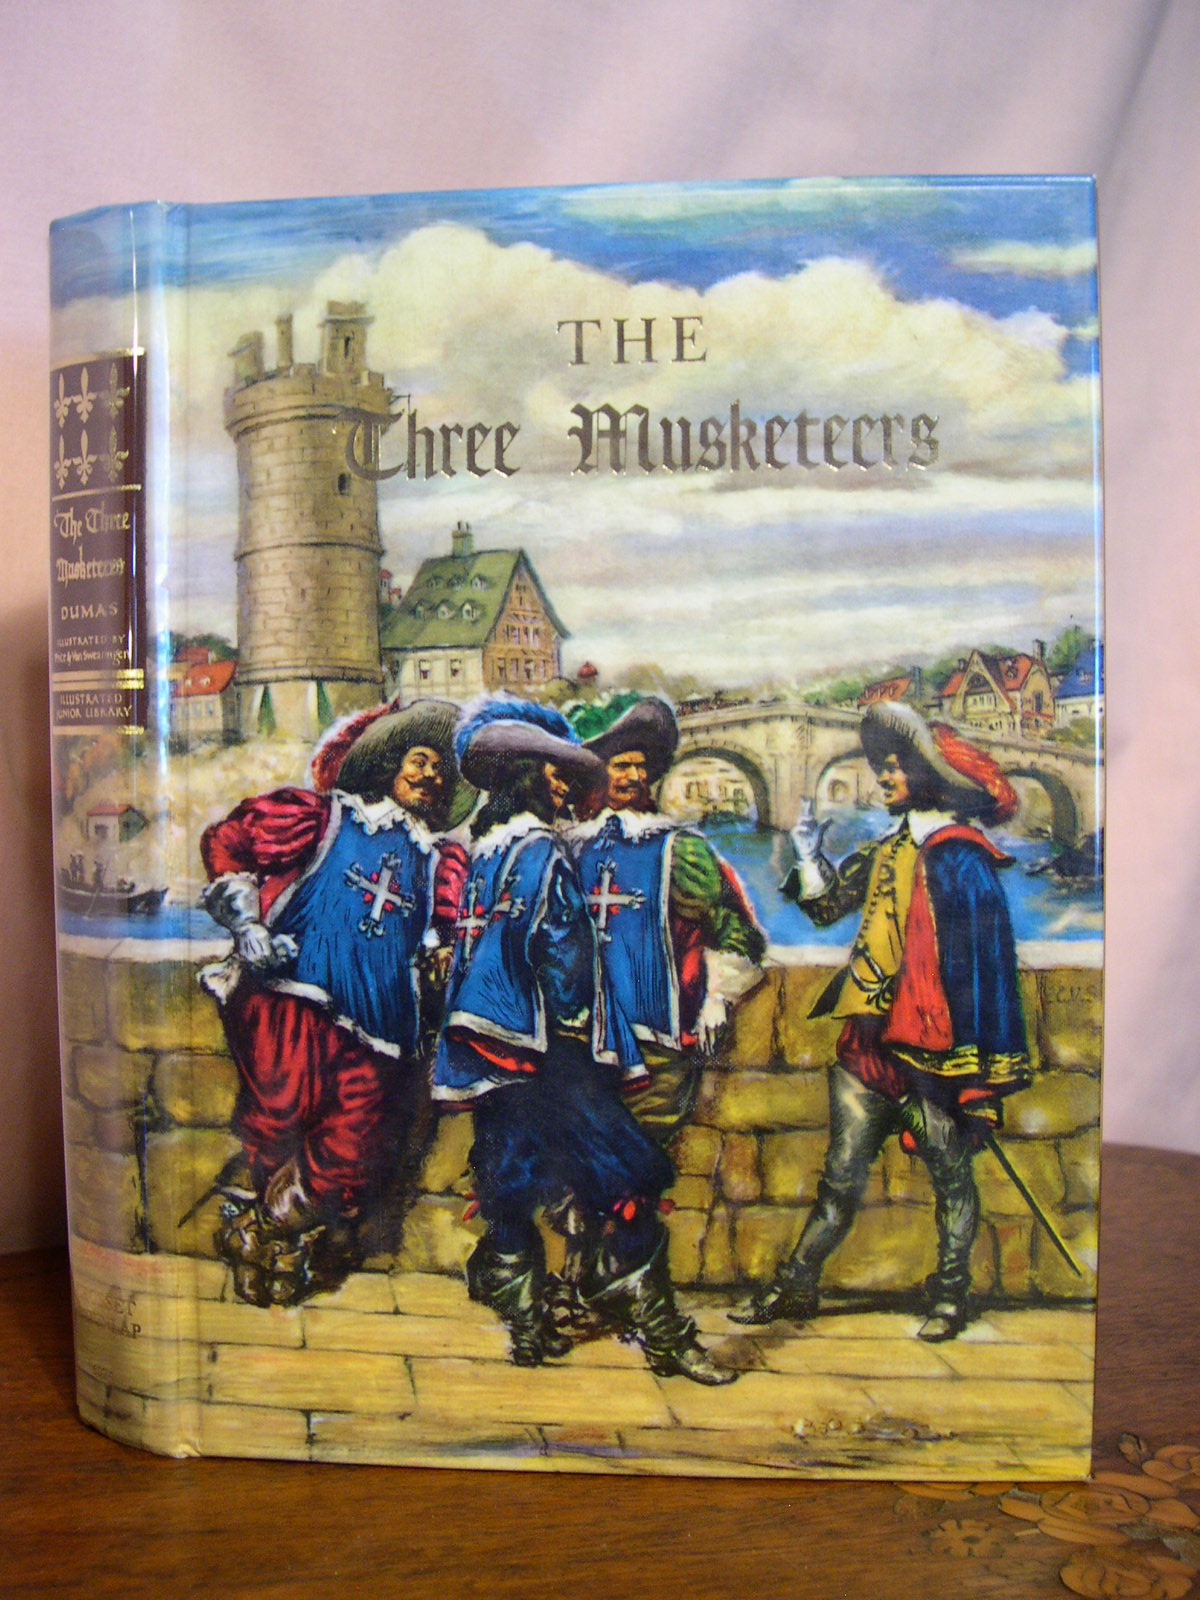 The Three Musketeers by Alexandre Dumas - AbeBooks